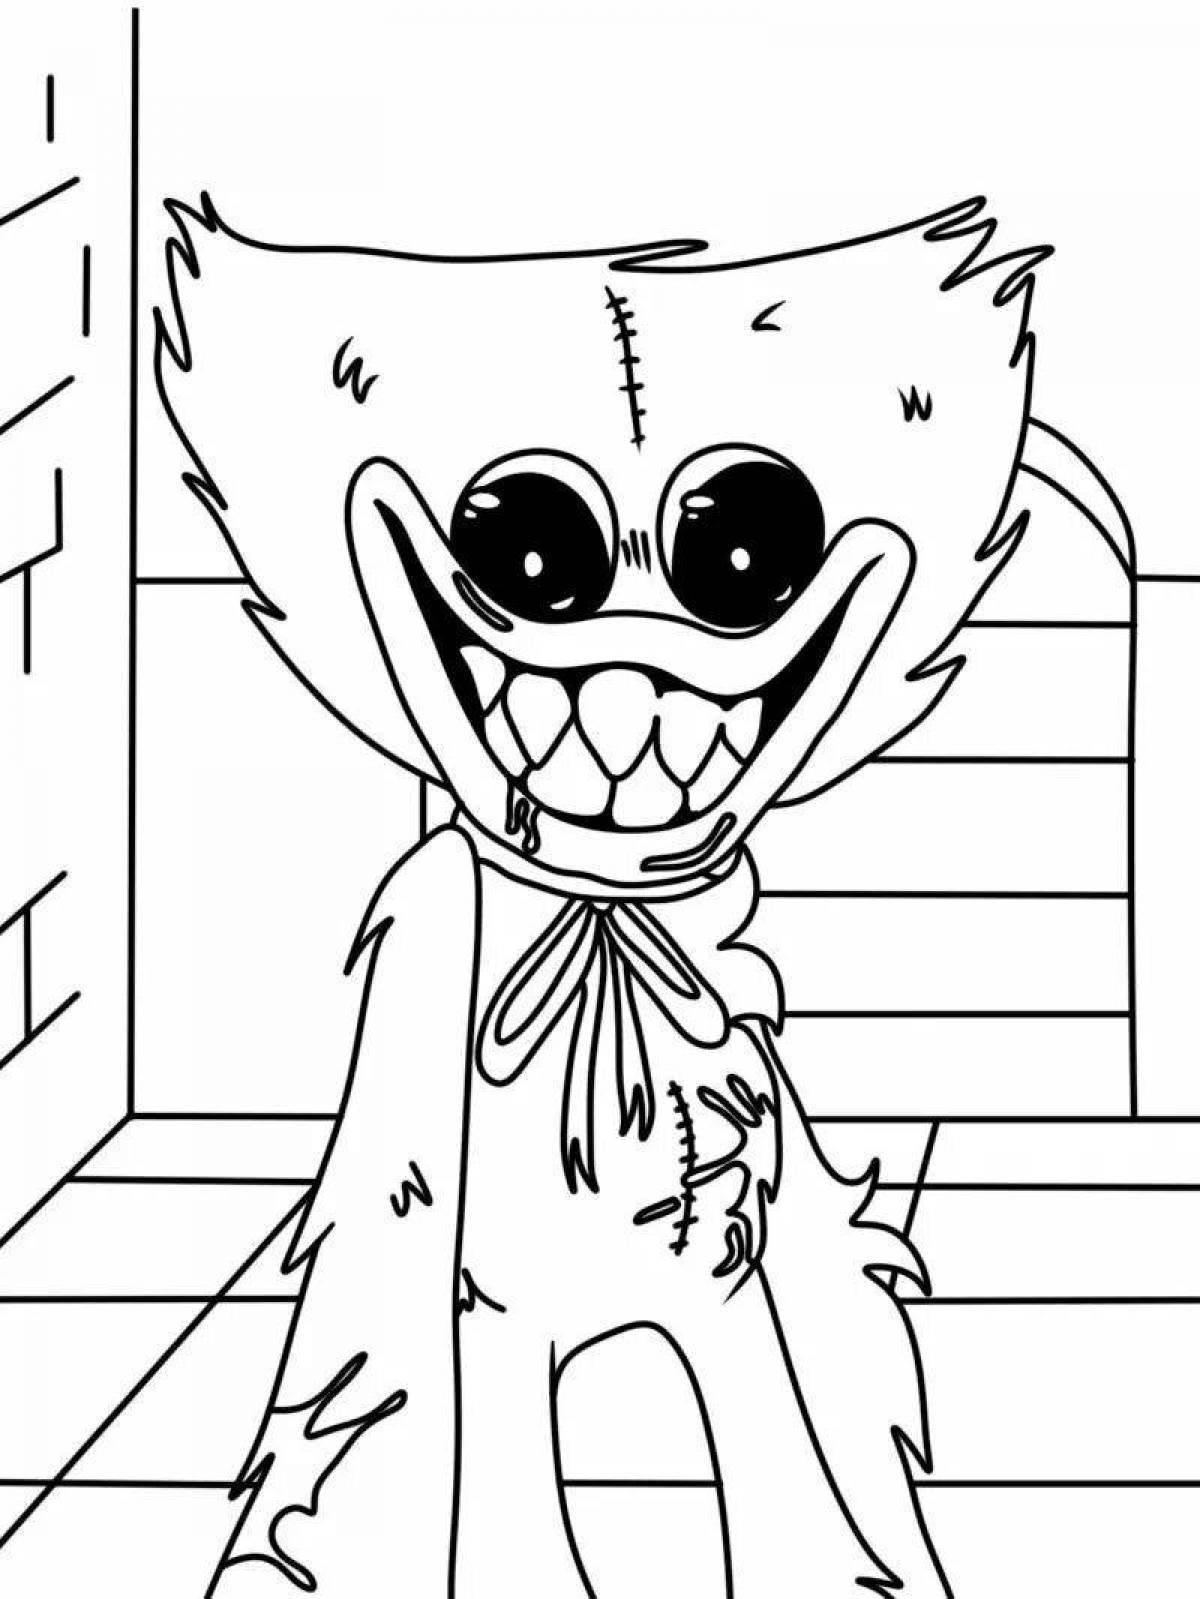 Charming game drink coloring page